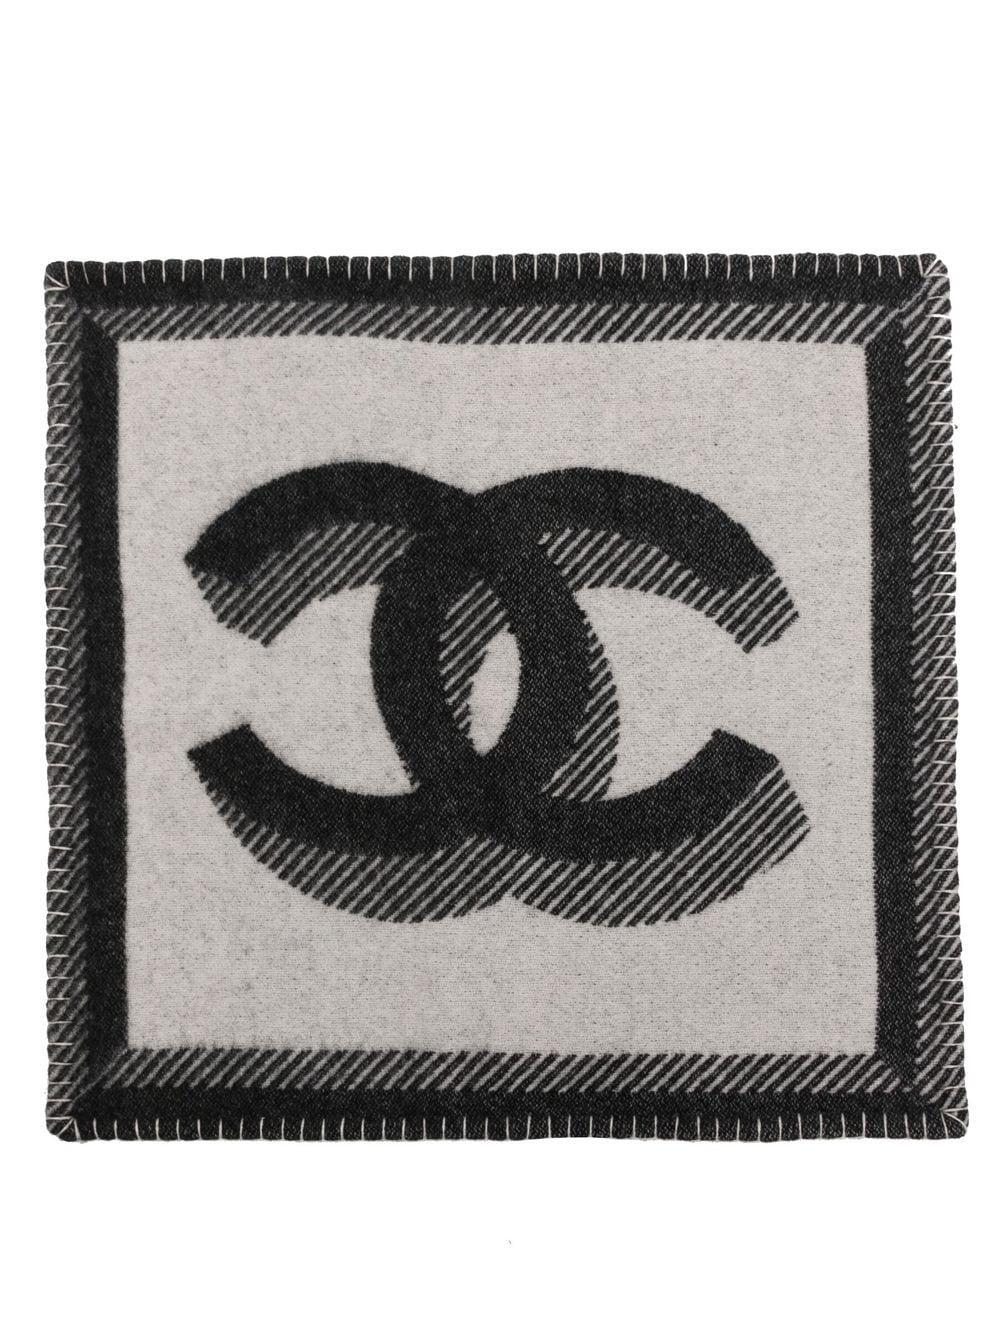 Pairing perfectly with the Chanel Logo-Jacquard Wool blanket, this Chanel pillowcase is the perfect piece to add a little bit of luxury into your home. With the iconic double CC at the centre, the brand really shines through in a beautiful Wool and